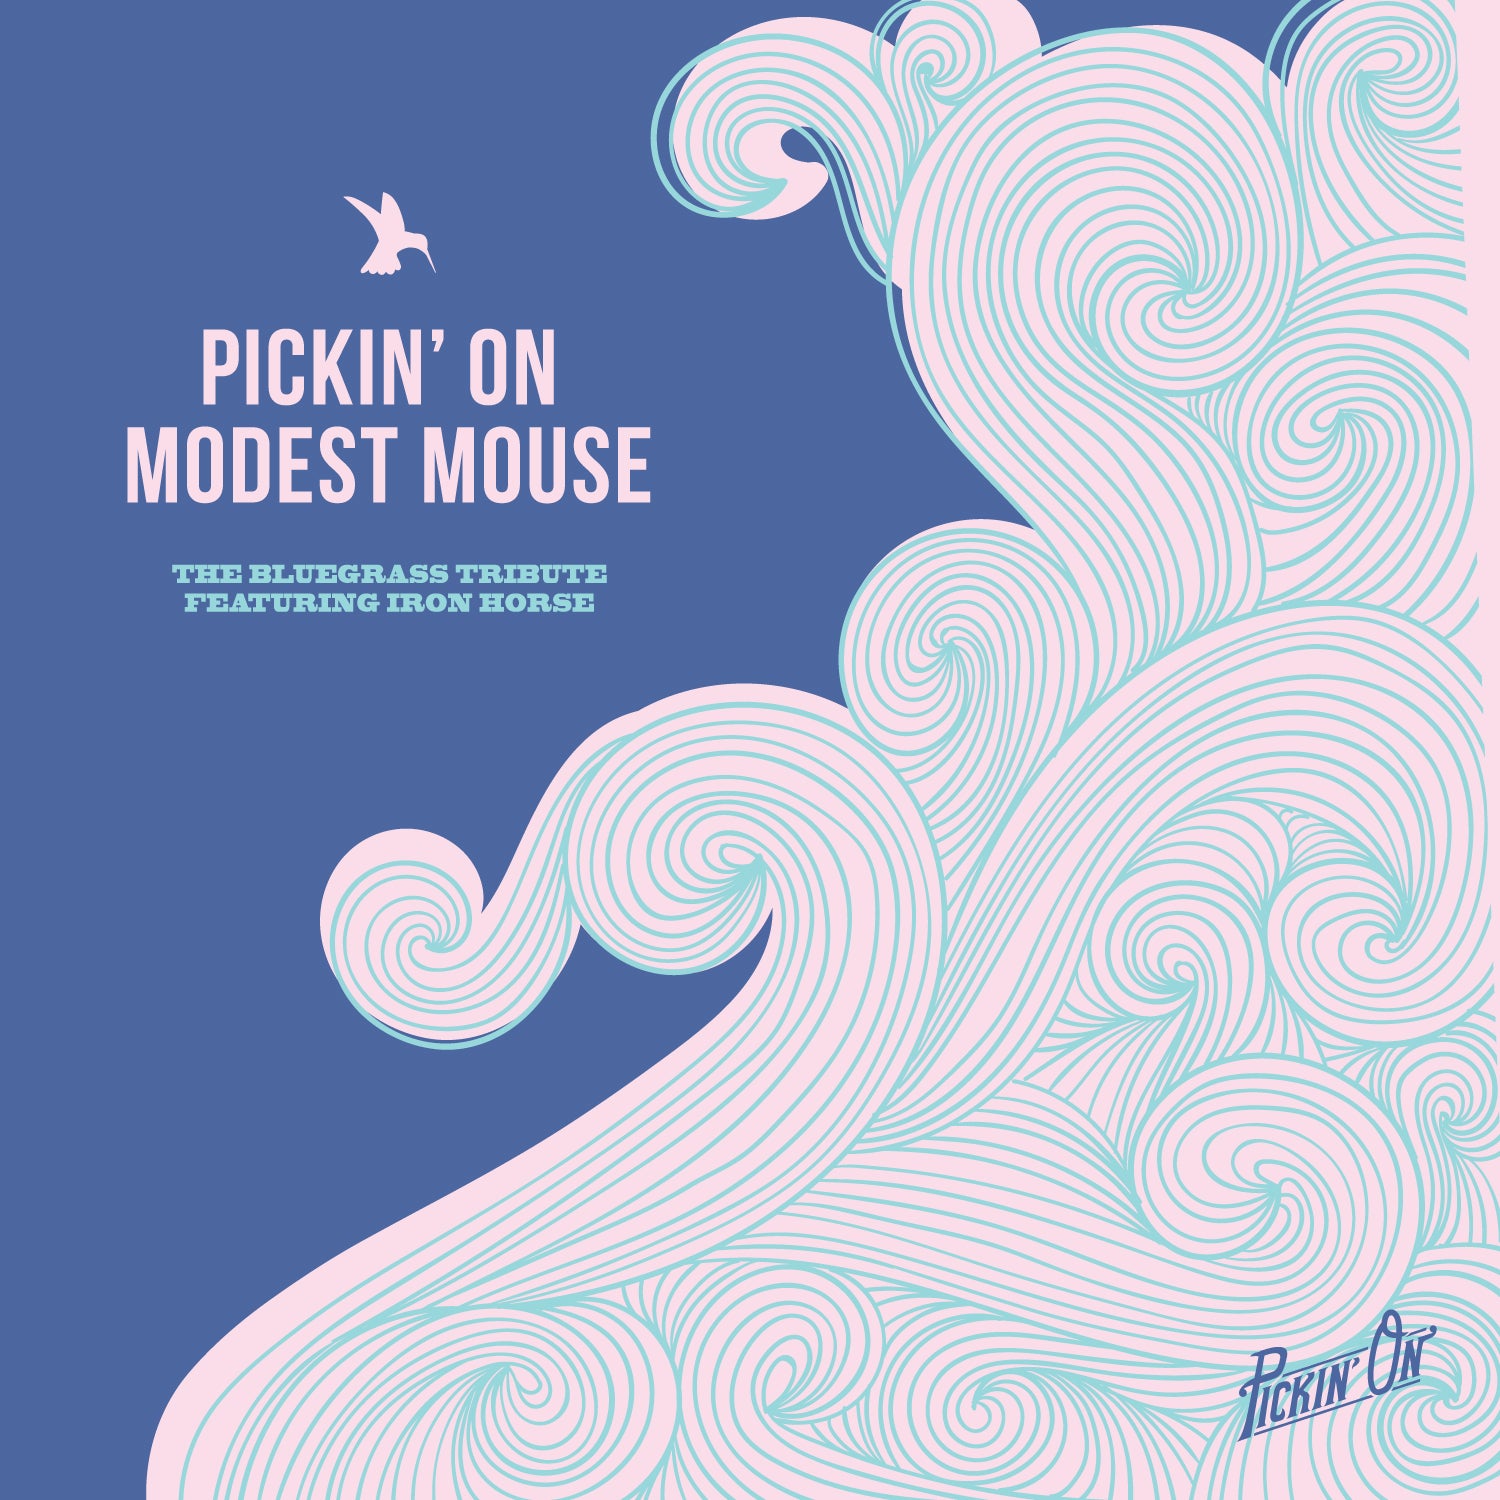 Something You've Never Heard Before: Bluegrass to Modest Mouse